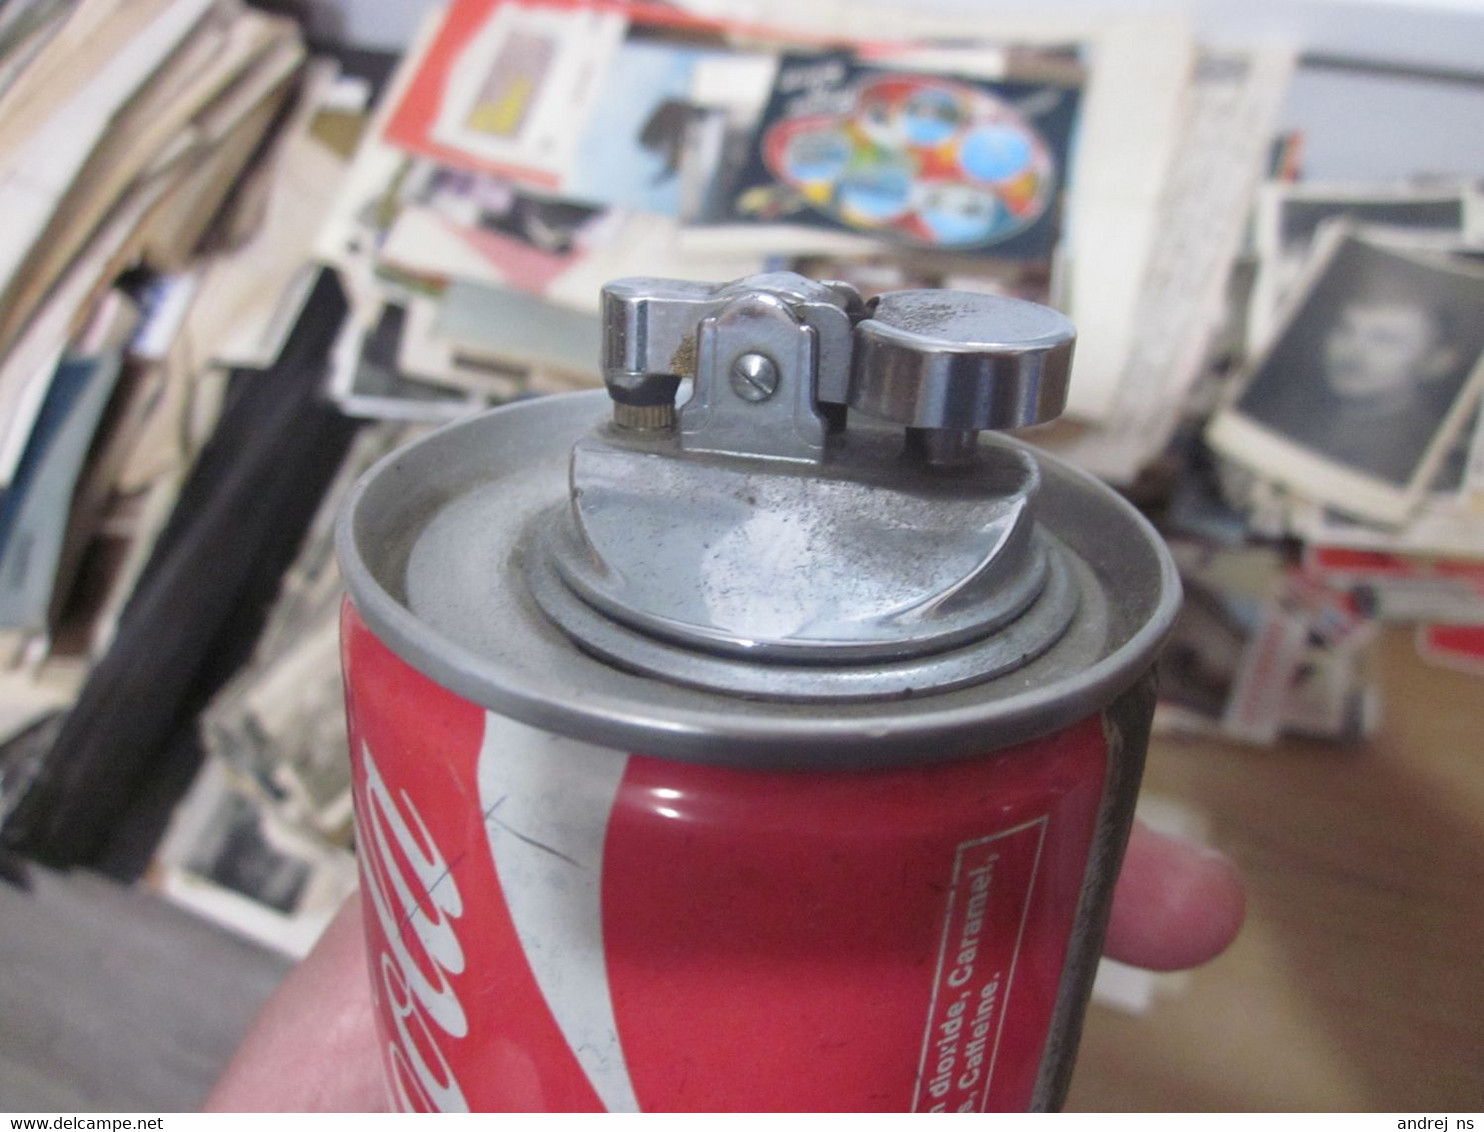 Lighter In The Shape Of A Can I Don't Know If It Is Correct, The Flint Works, Kingsway Foreign Made Coke Coca Cola - Lighters